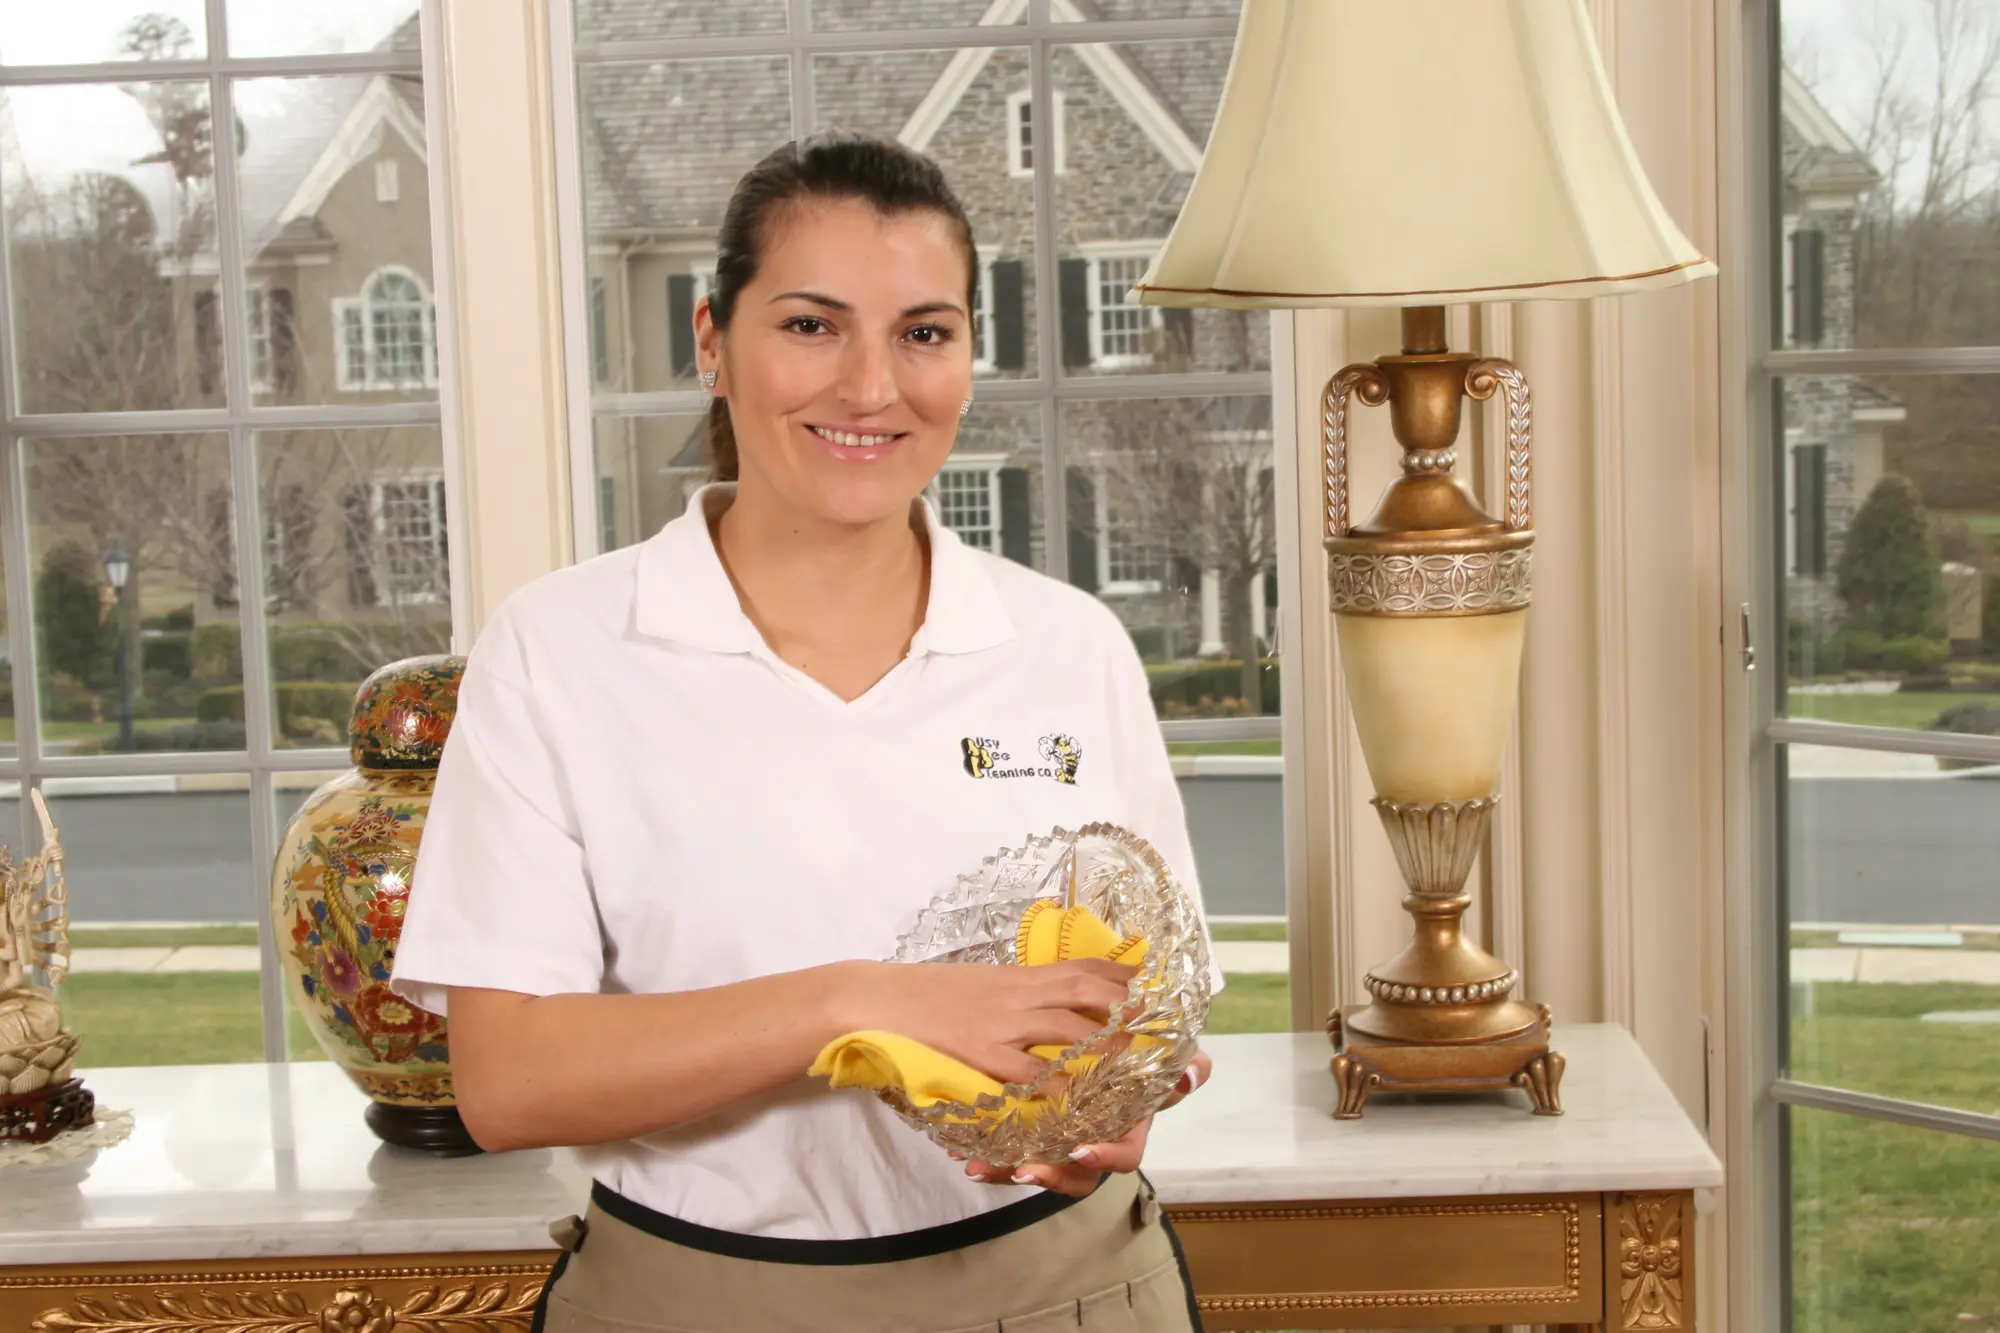 house cleaning newtown square pa, home cleaning services newtown square pa, house cleaning services in newtown square pa, residential cleaning newtown square pa, residential cleaning services newtown square pa, clients, hire, hard working, bathrooms, items removed, close attention, great care